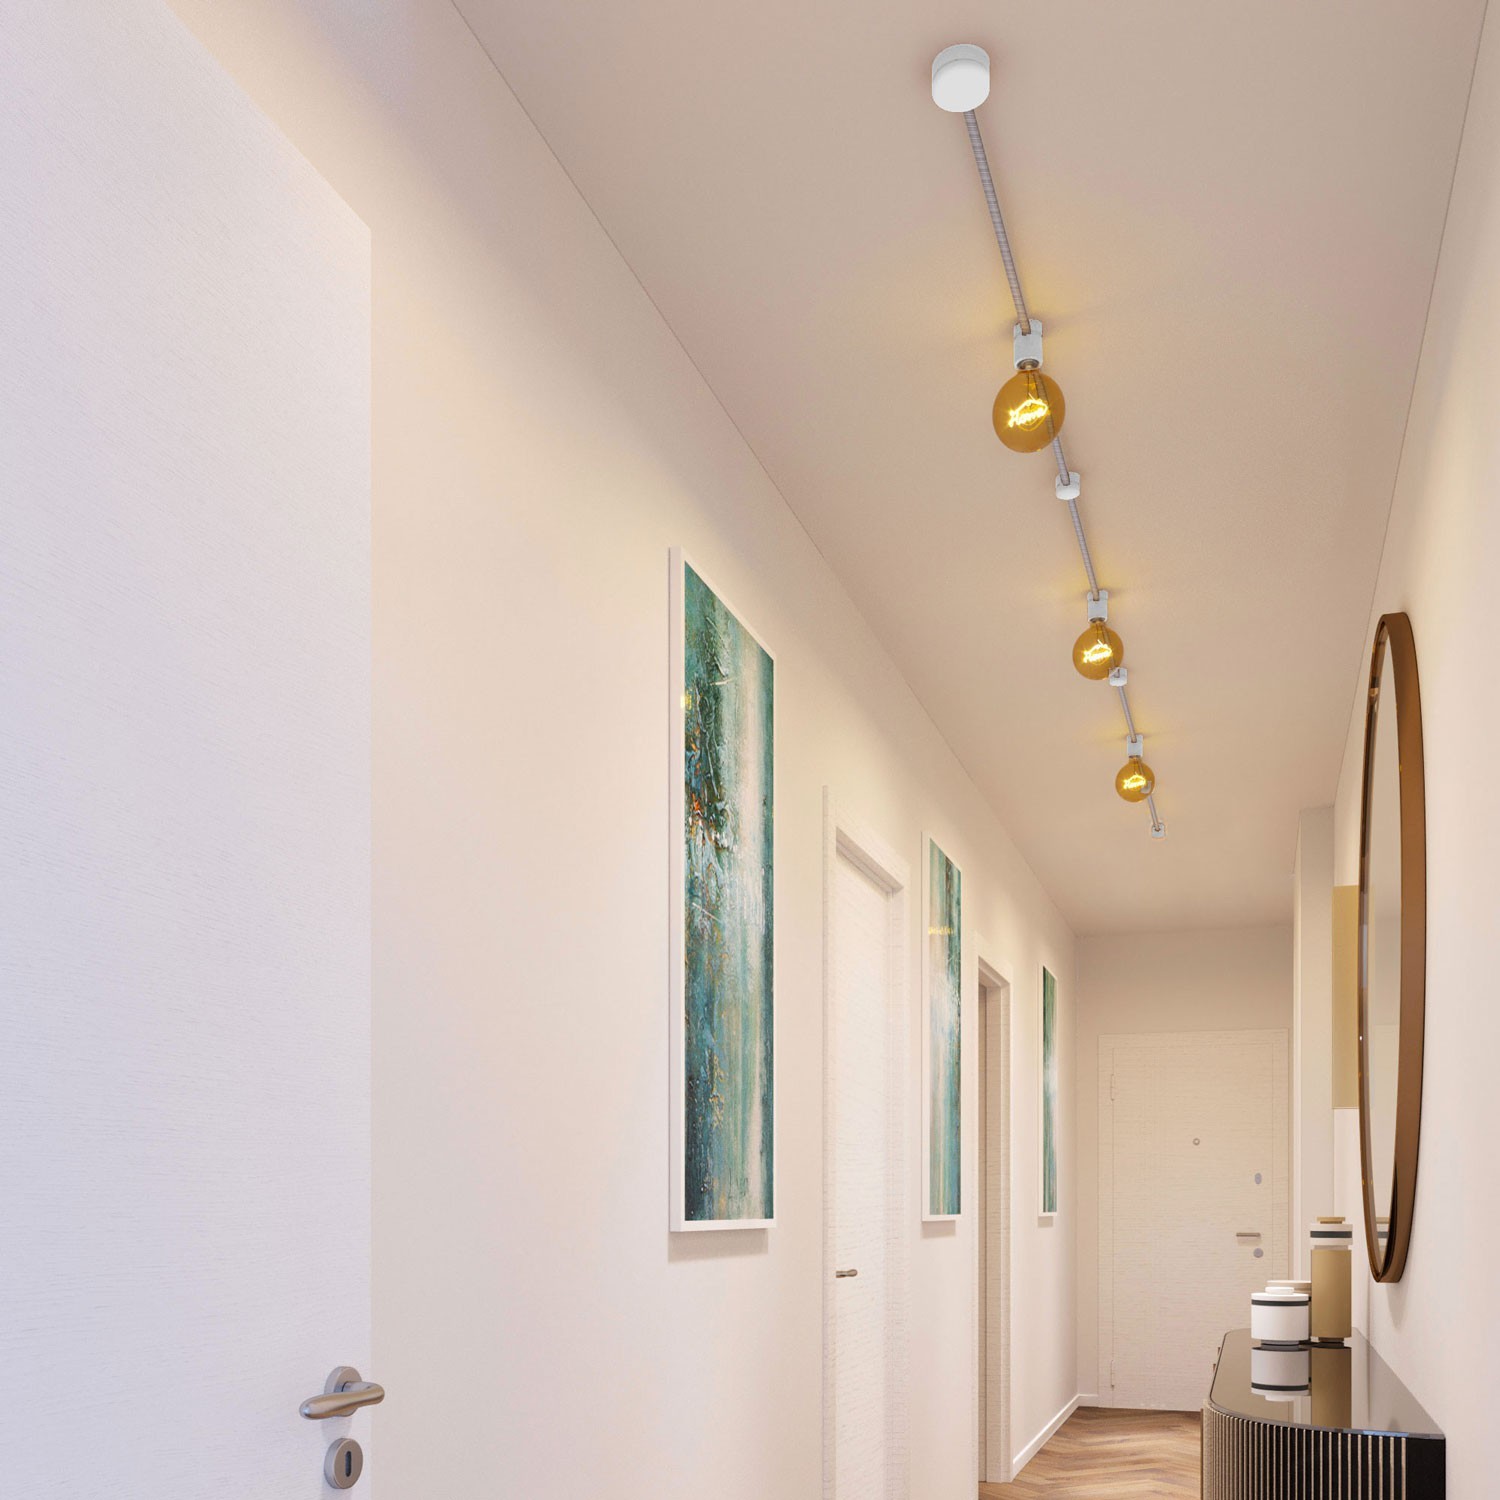 Filé System Linear Kit - with 5m string light cable and 7 indoor white varnished wooden components